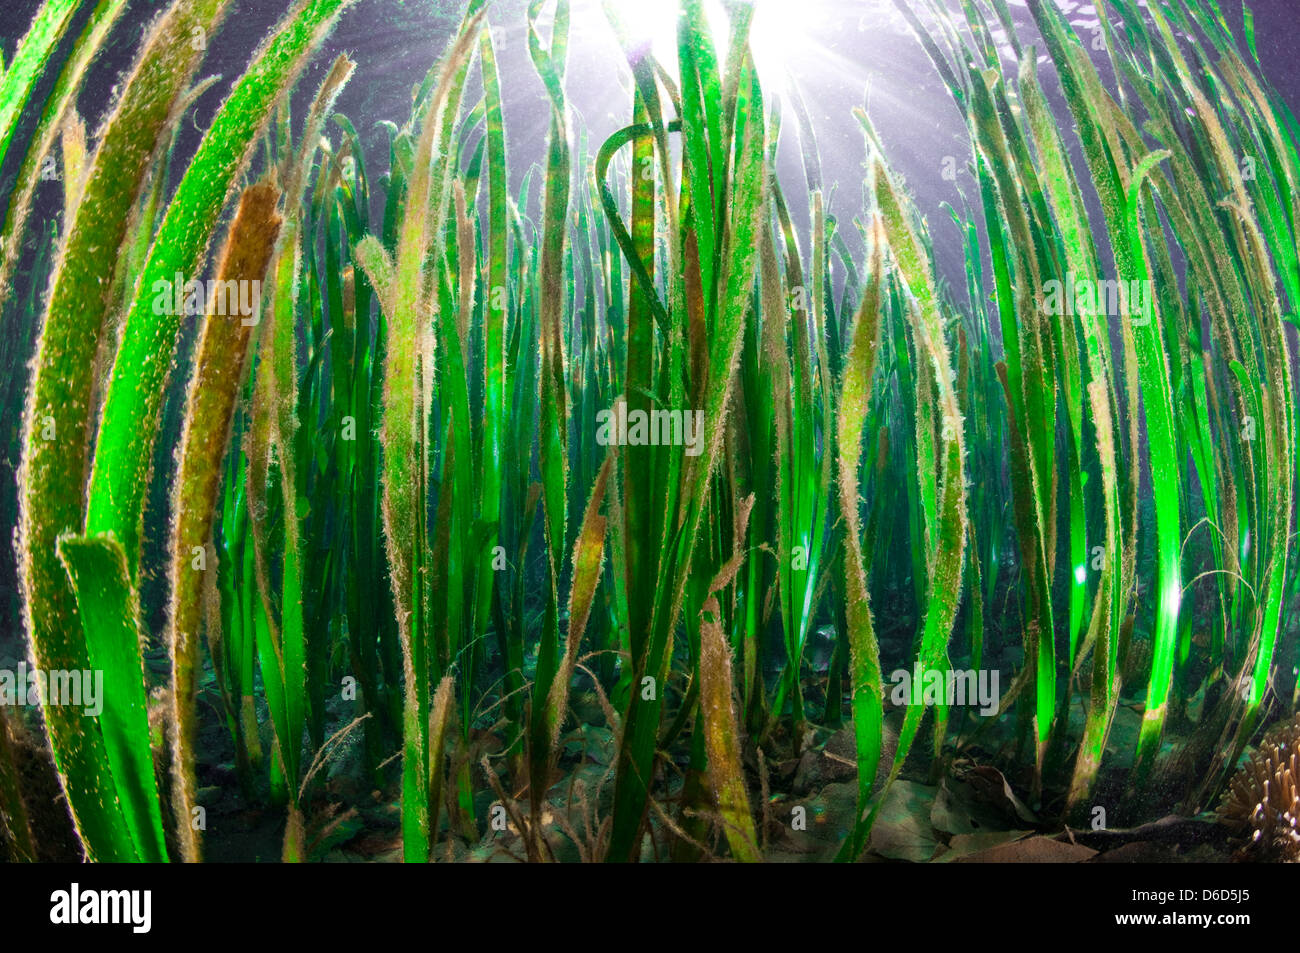 Underwater image of 4' tall turtle grass in shallow water.  Rays of sunlight pierce between the blades. Stock Photo